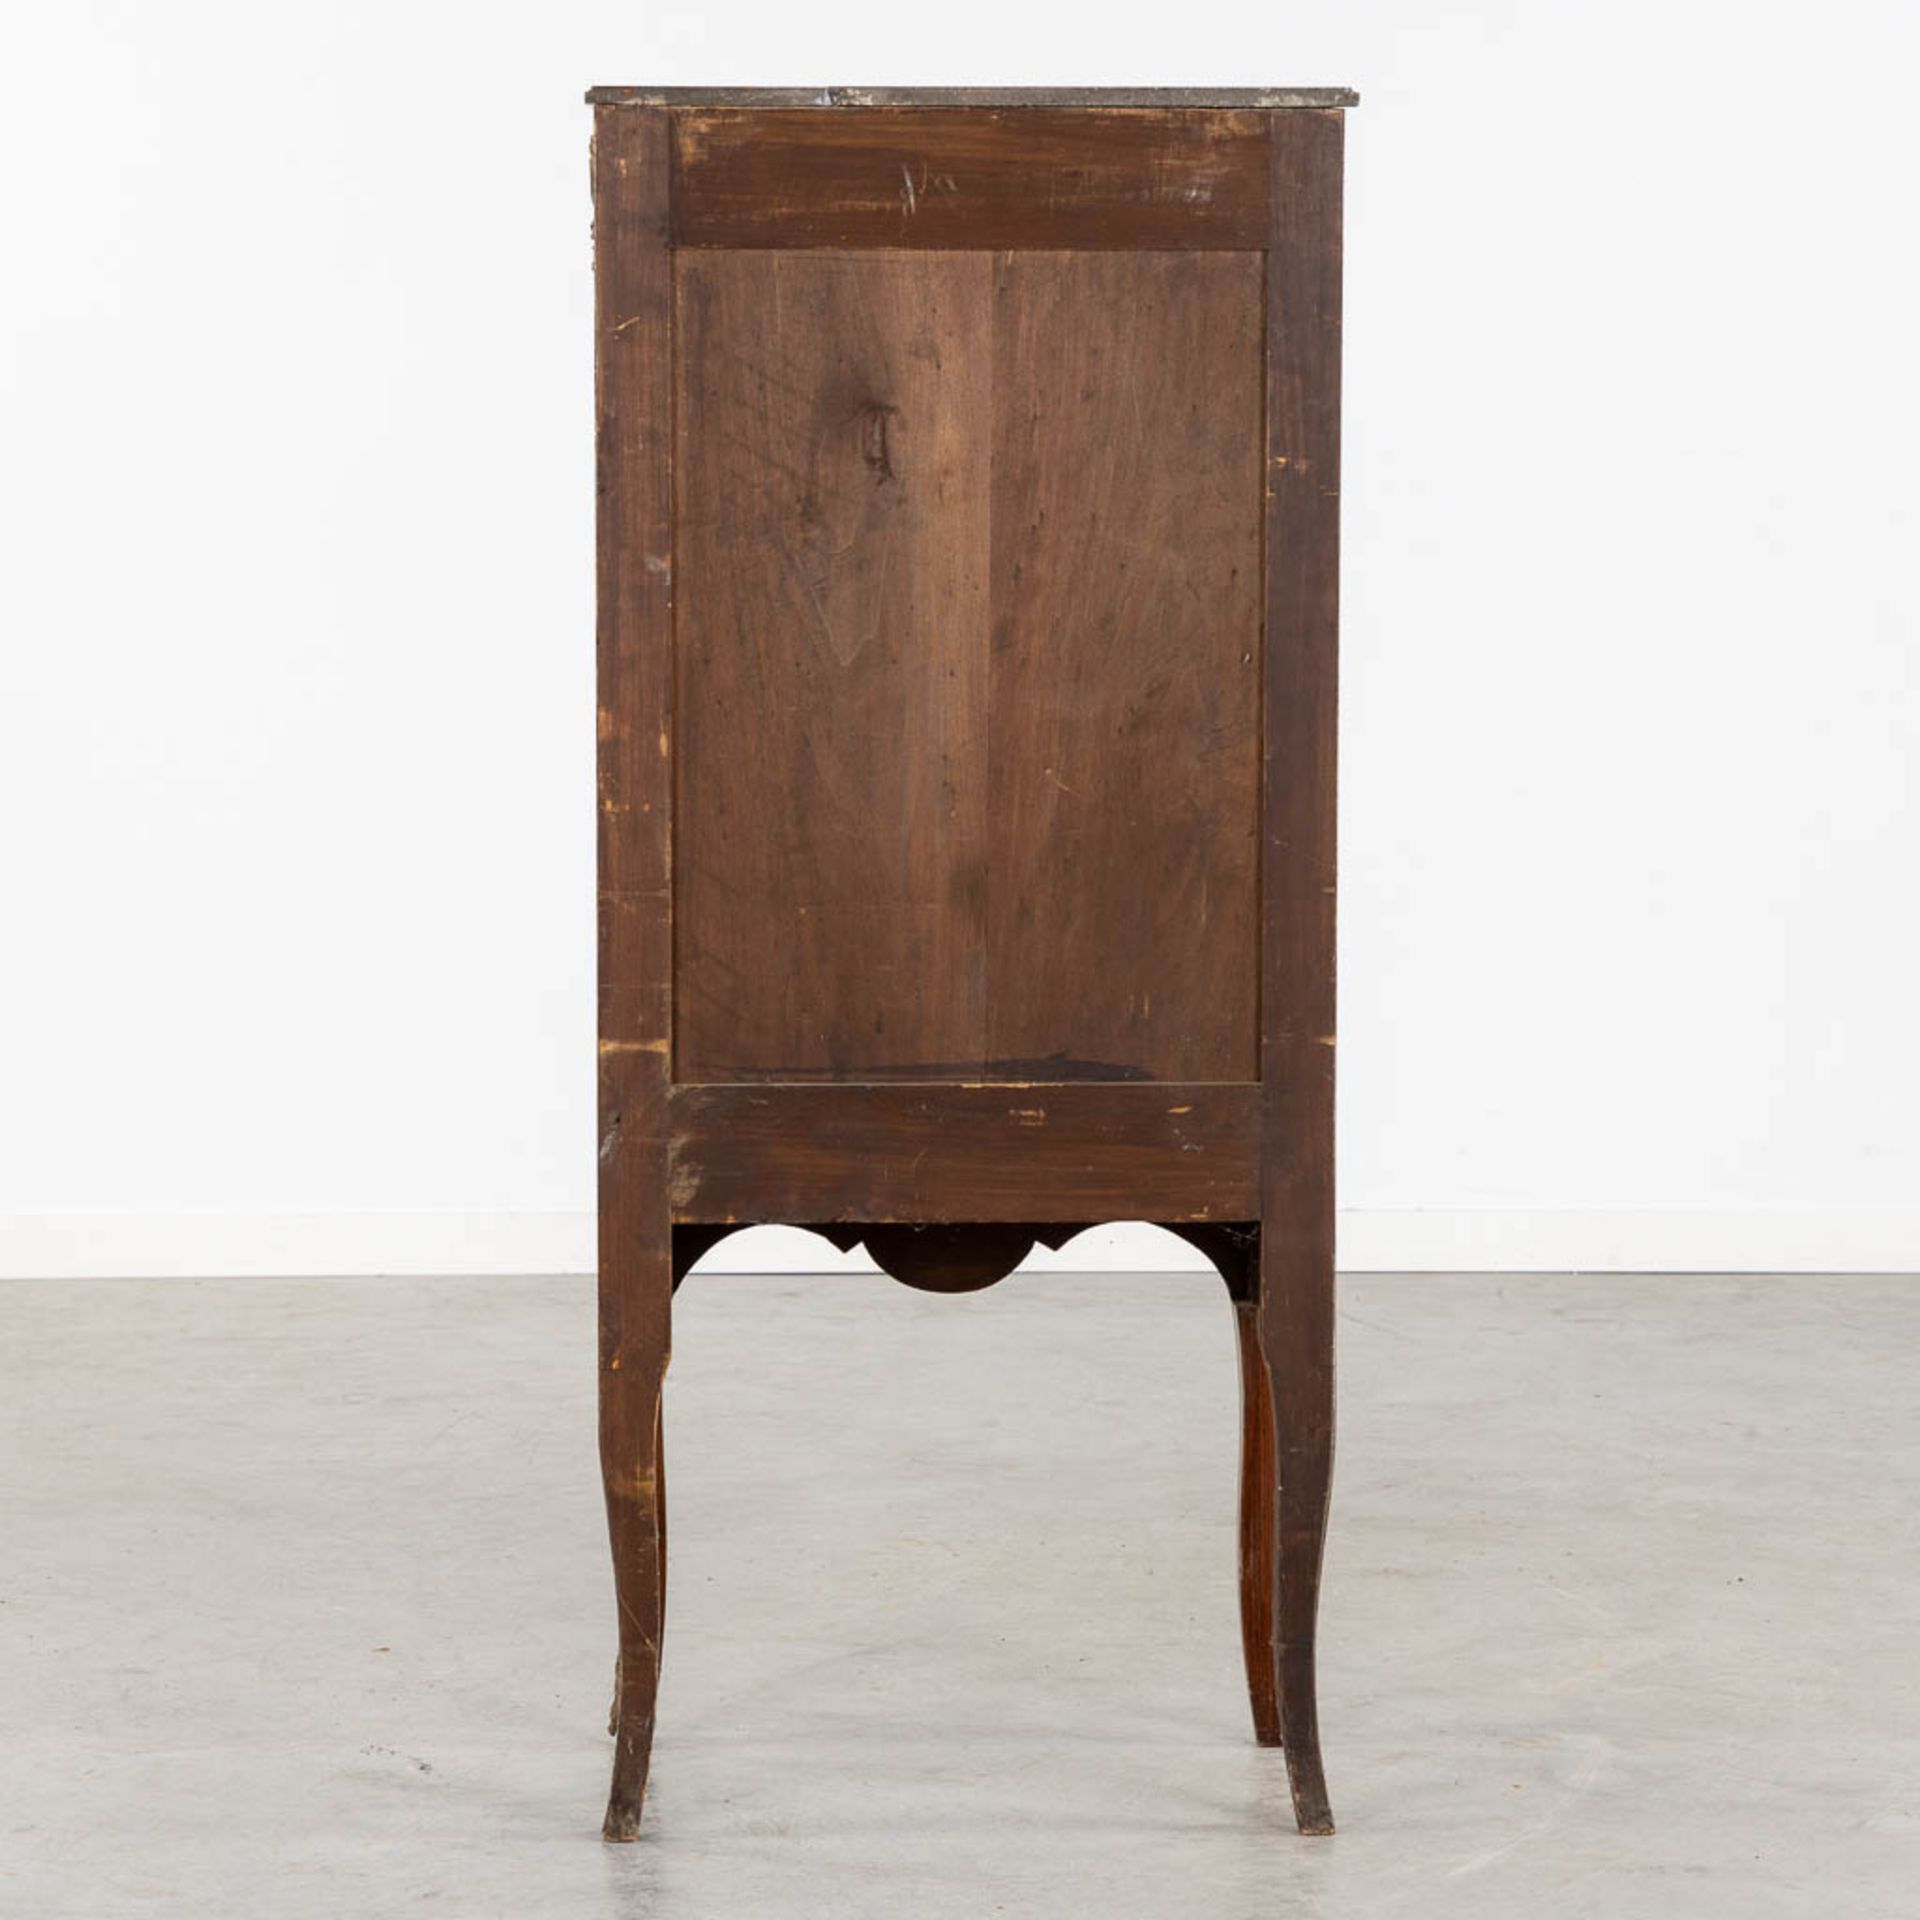 A Secretaire cabinet, Marquetry inlay and mounted with bronze. Circa 1900. (L:34 x W:56 x H:128 cm) - Bild 8 aus 15